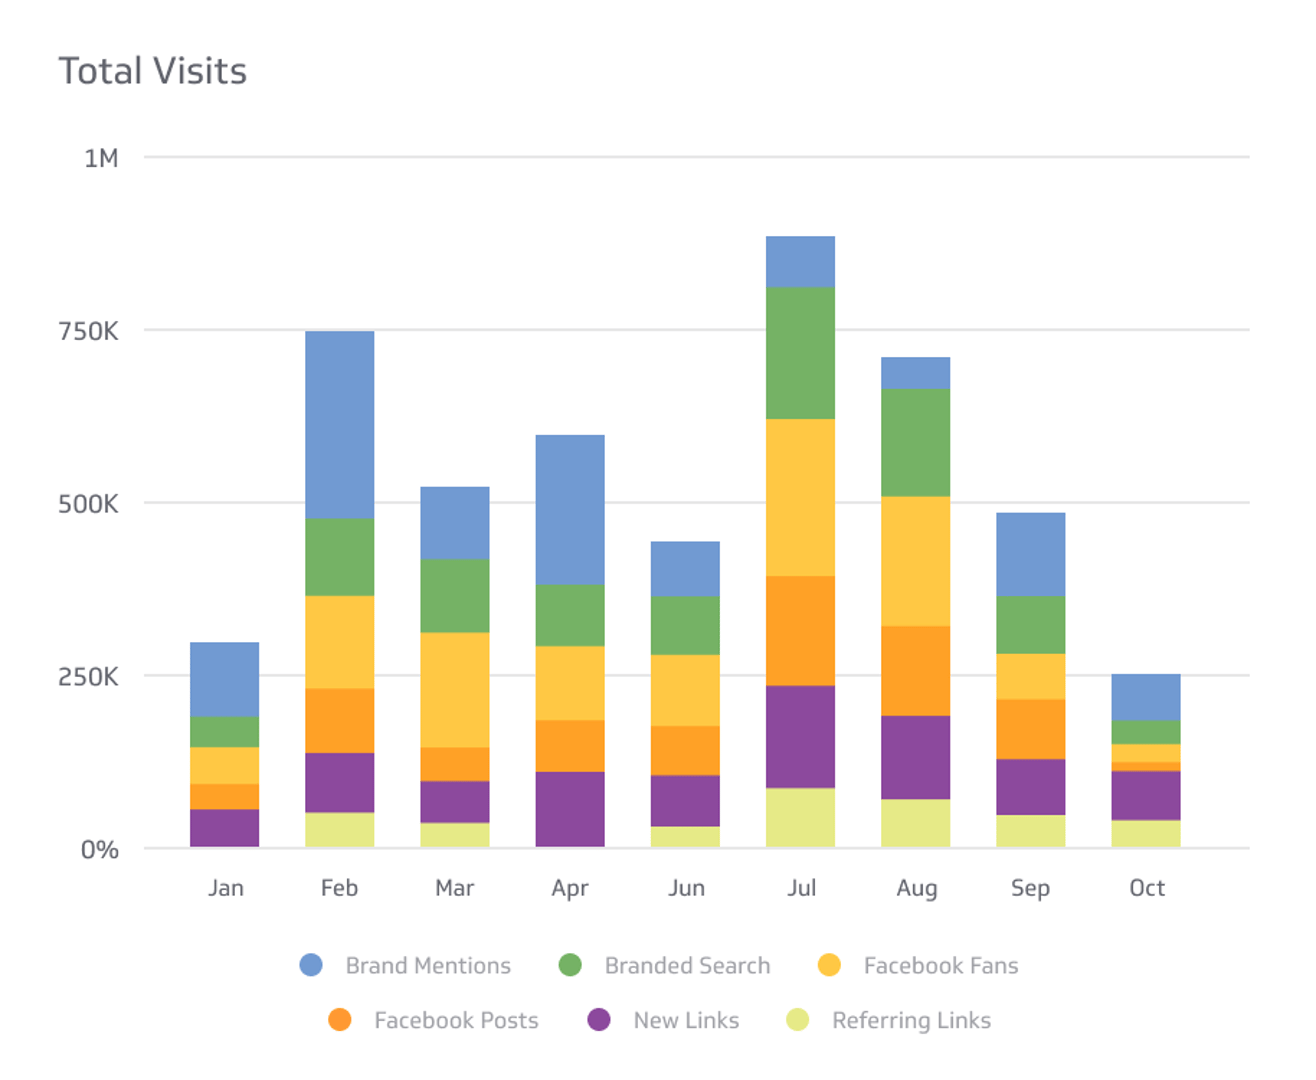 Related KPI Examples - Total Visits Metric